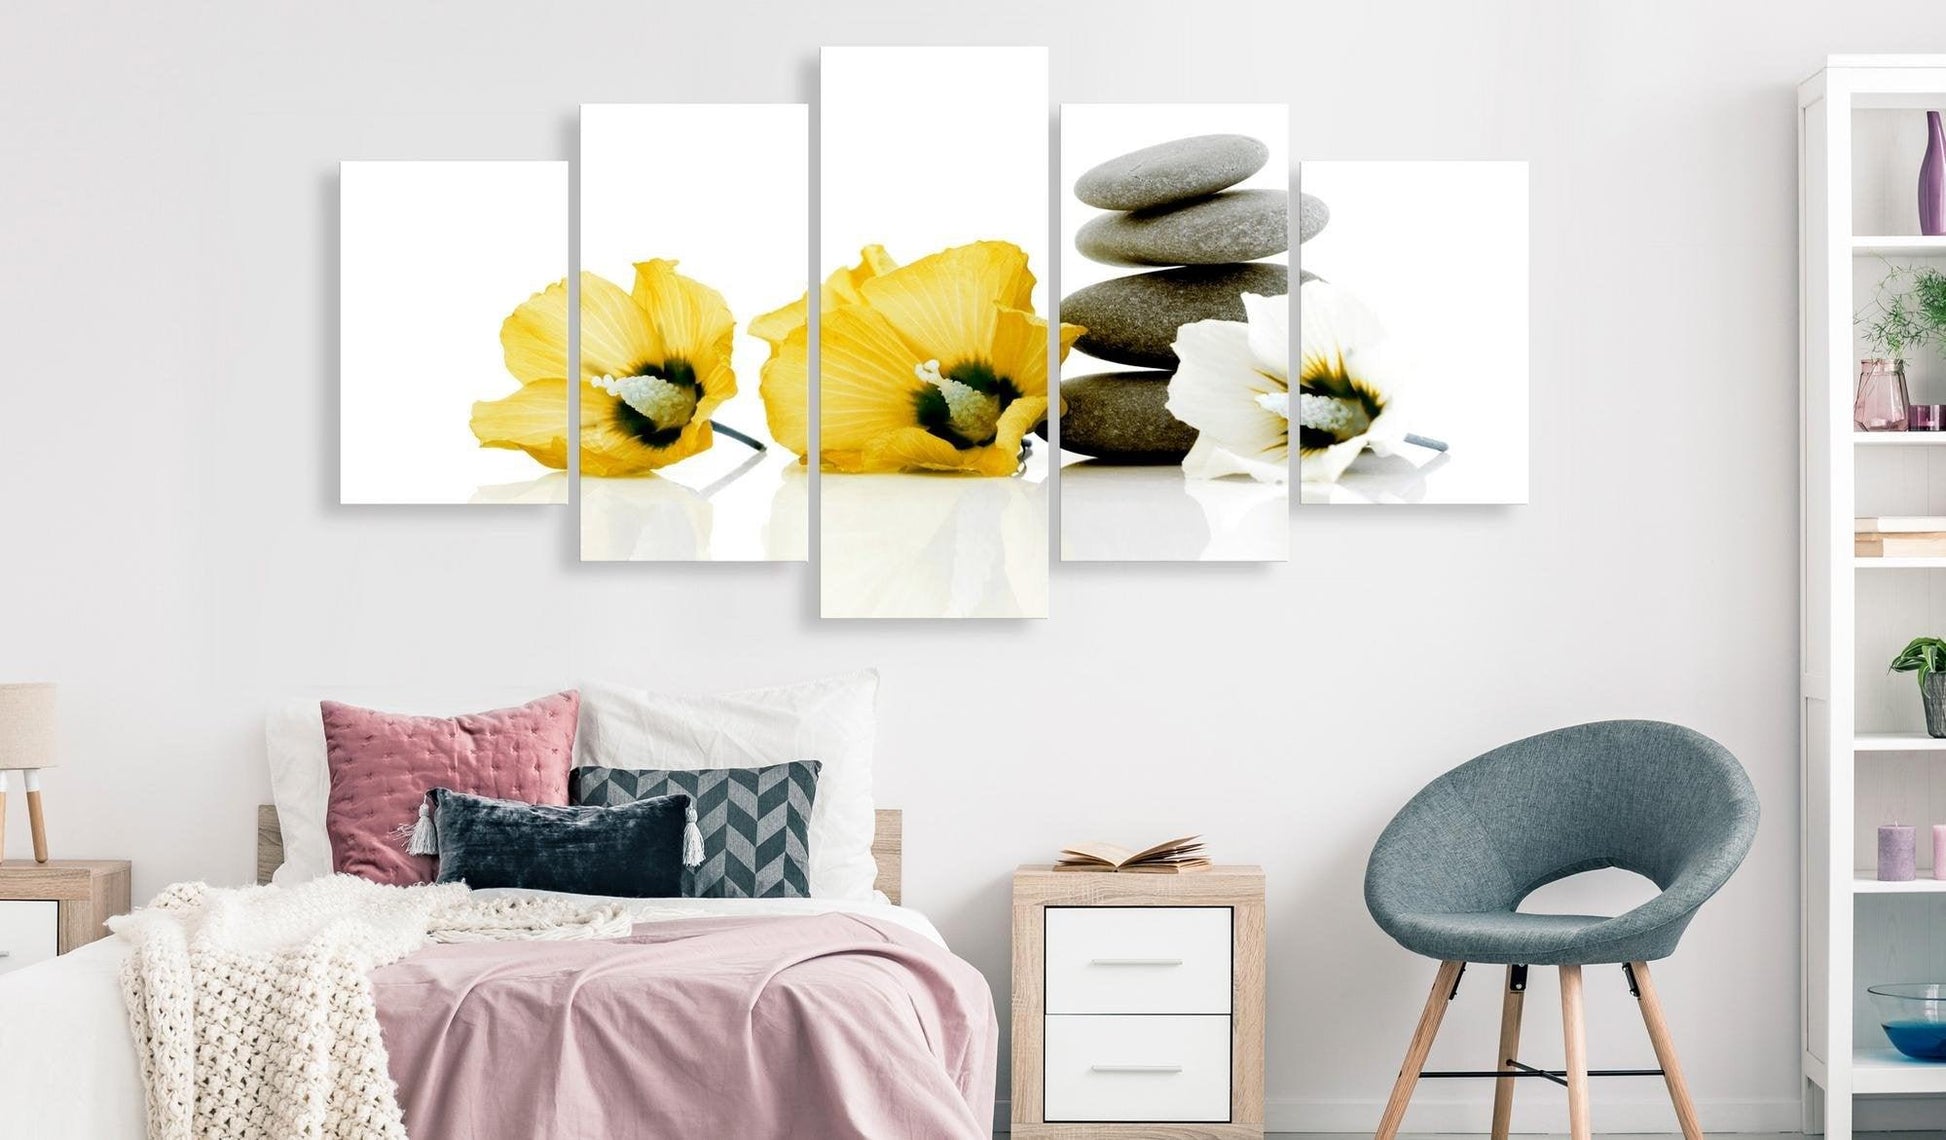 Canvas Print - Calm Mallow (5 Parts) Wide Yellow - www.trendingbestsellers.com